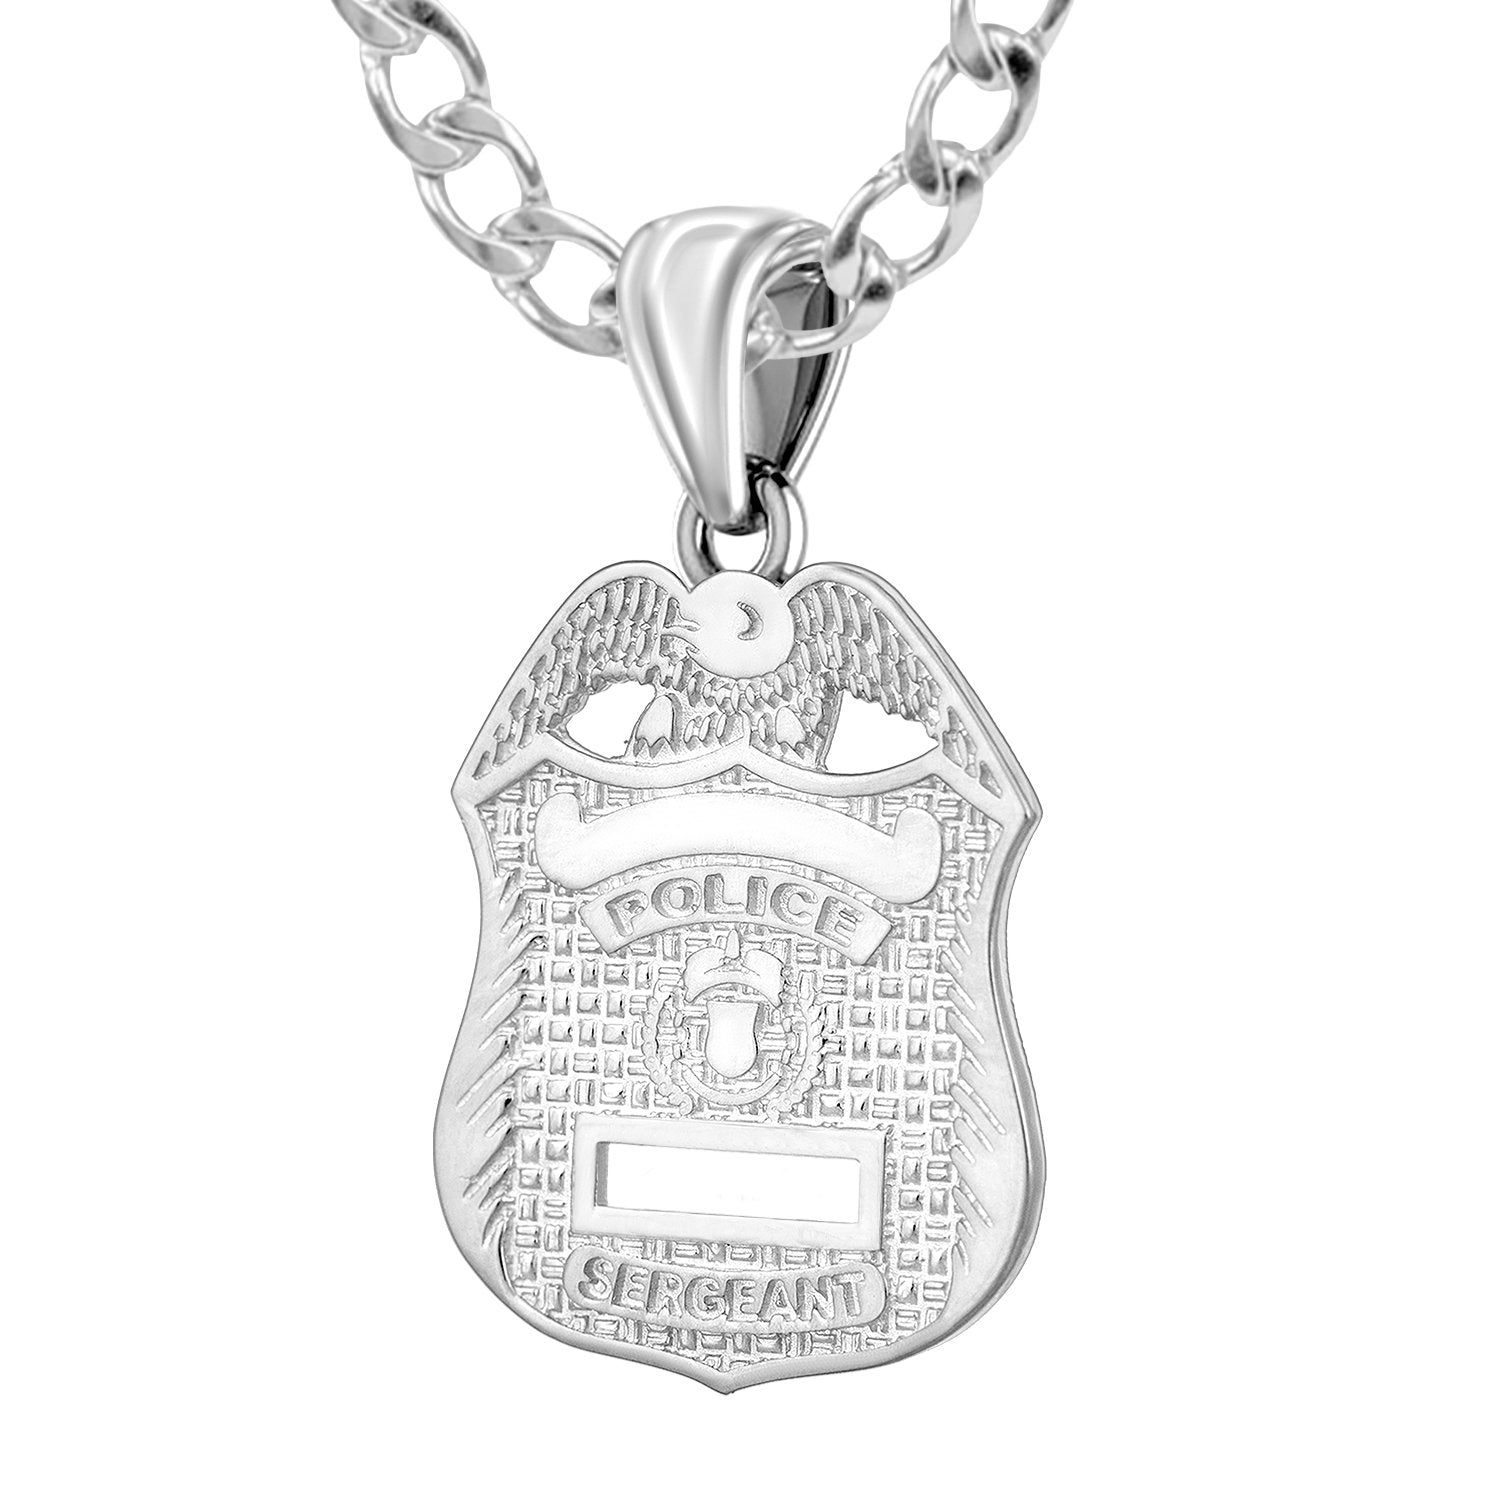 Silver Police Badge Necklace For Men - 4mm Round Curb Chain